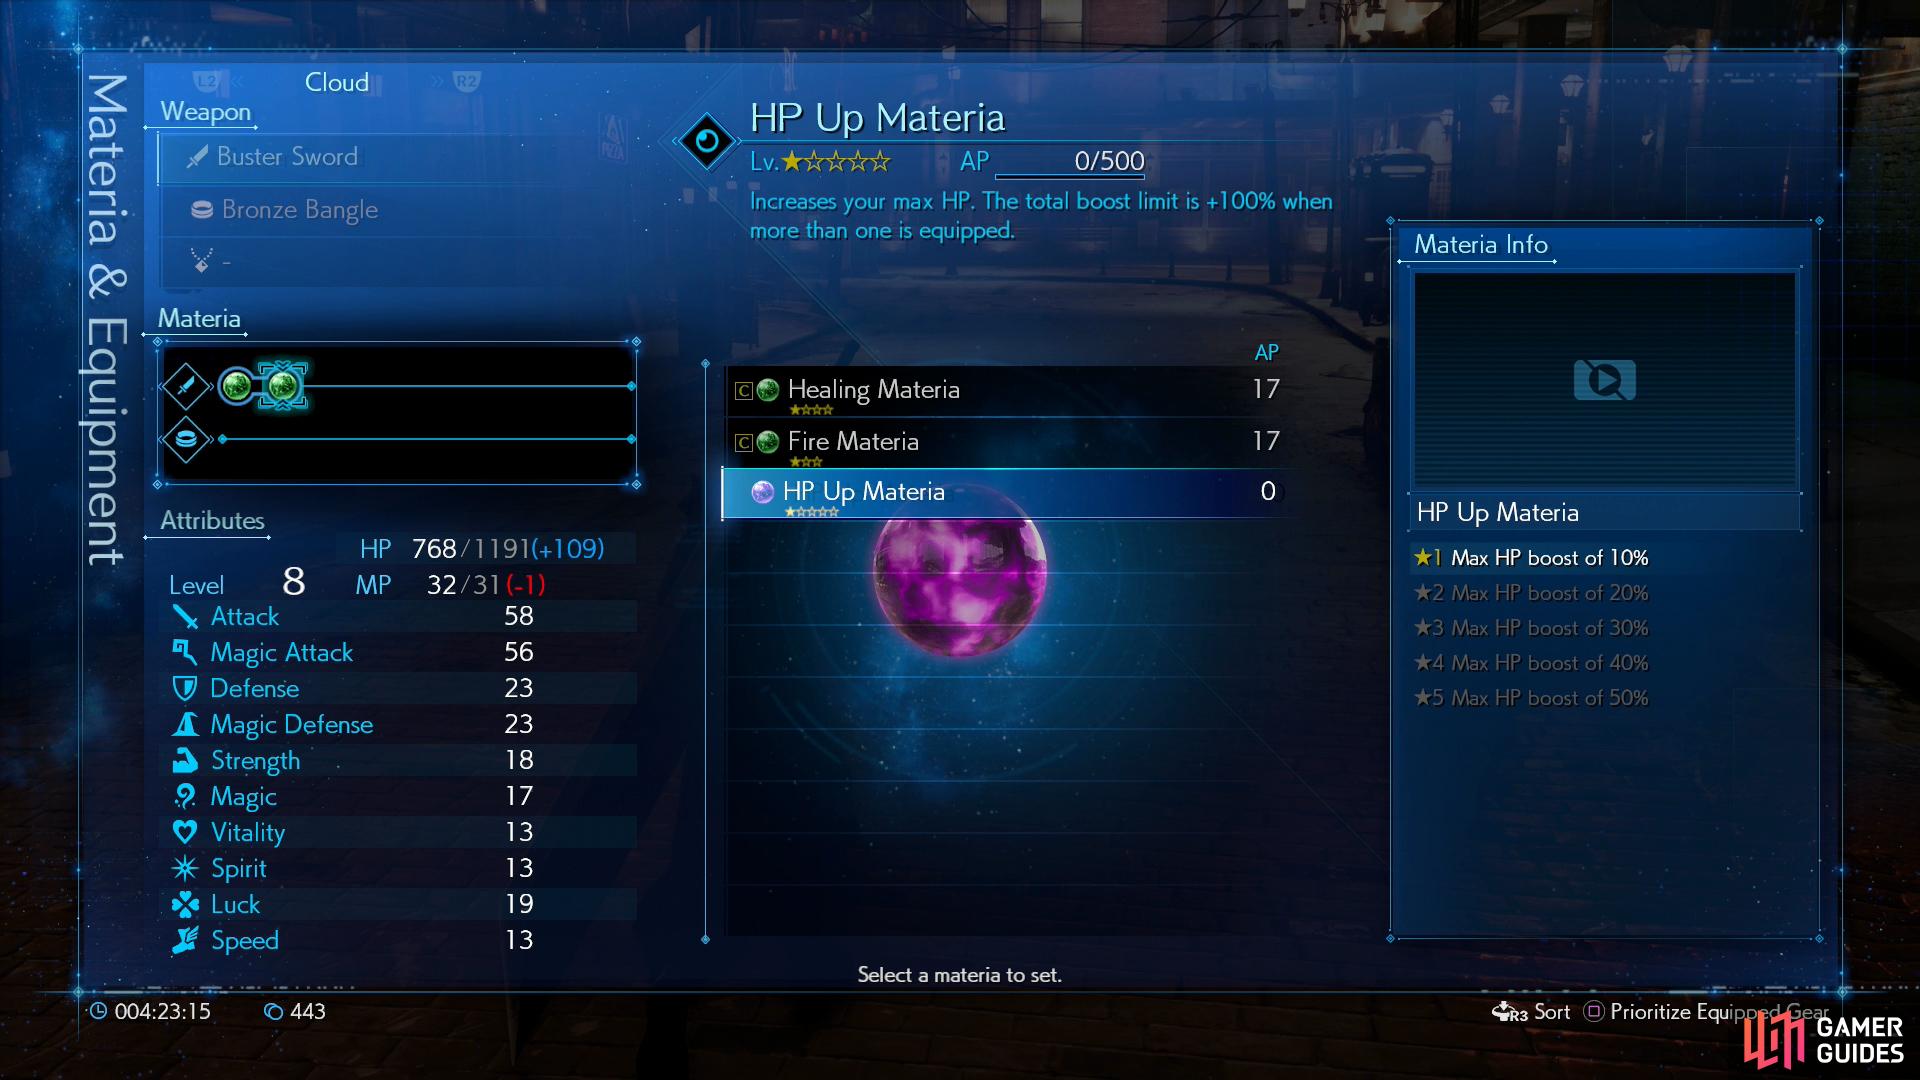 Equip it to boost your HP by +10% - an amount which will increase as you level the materia up.